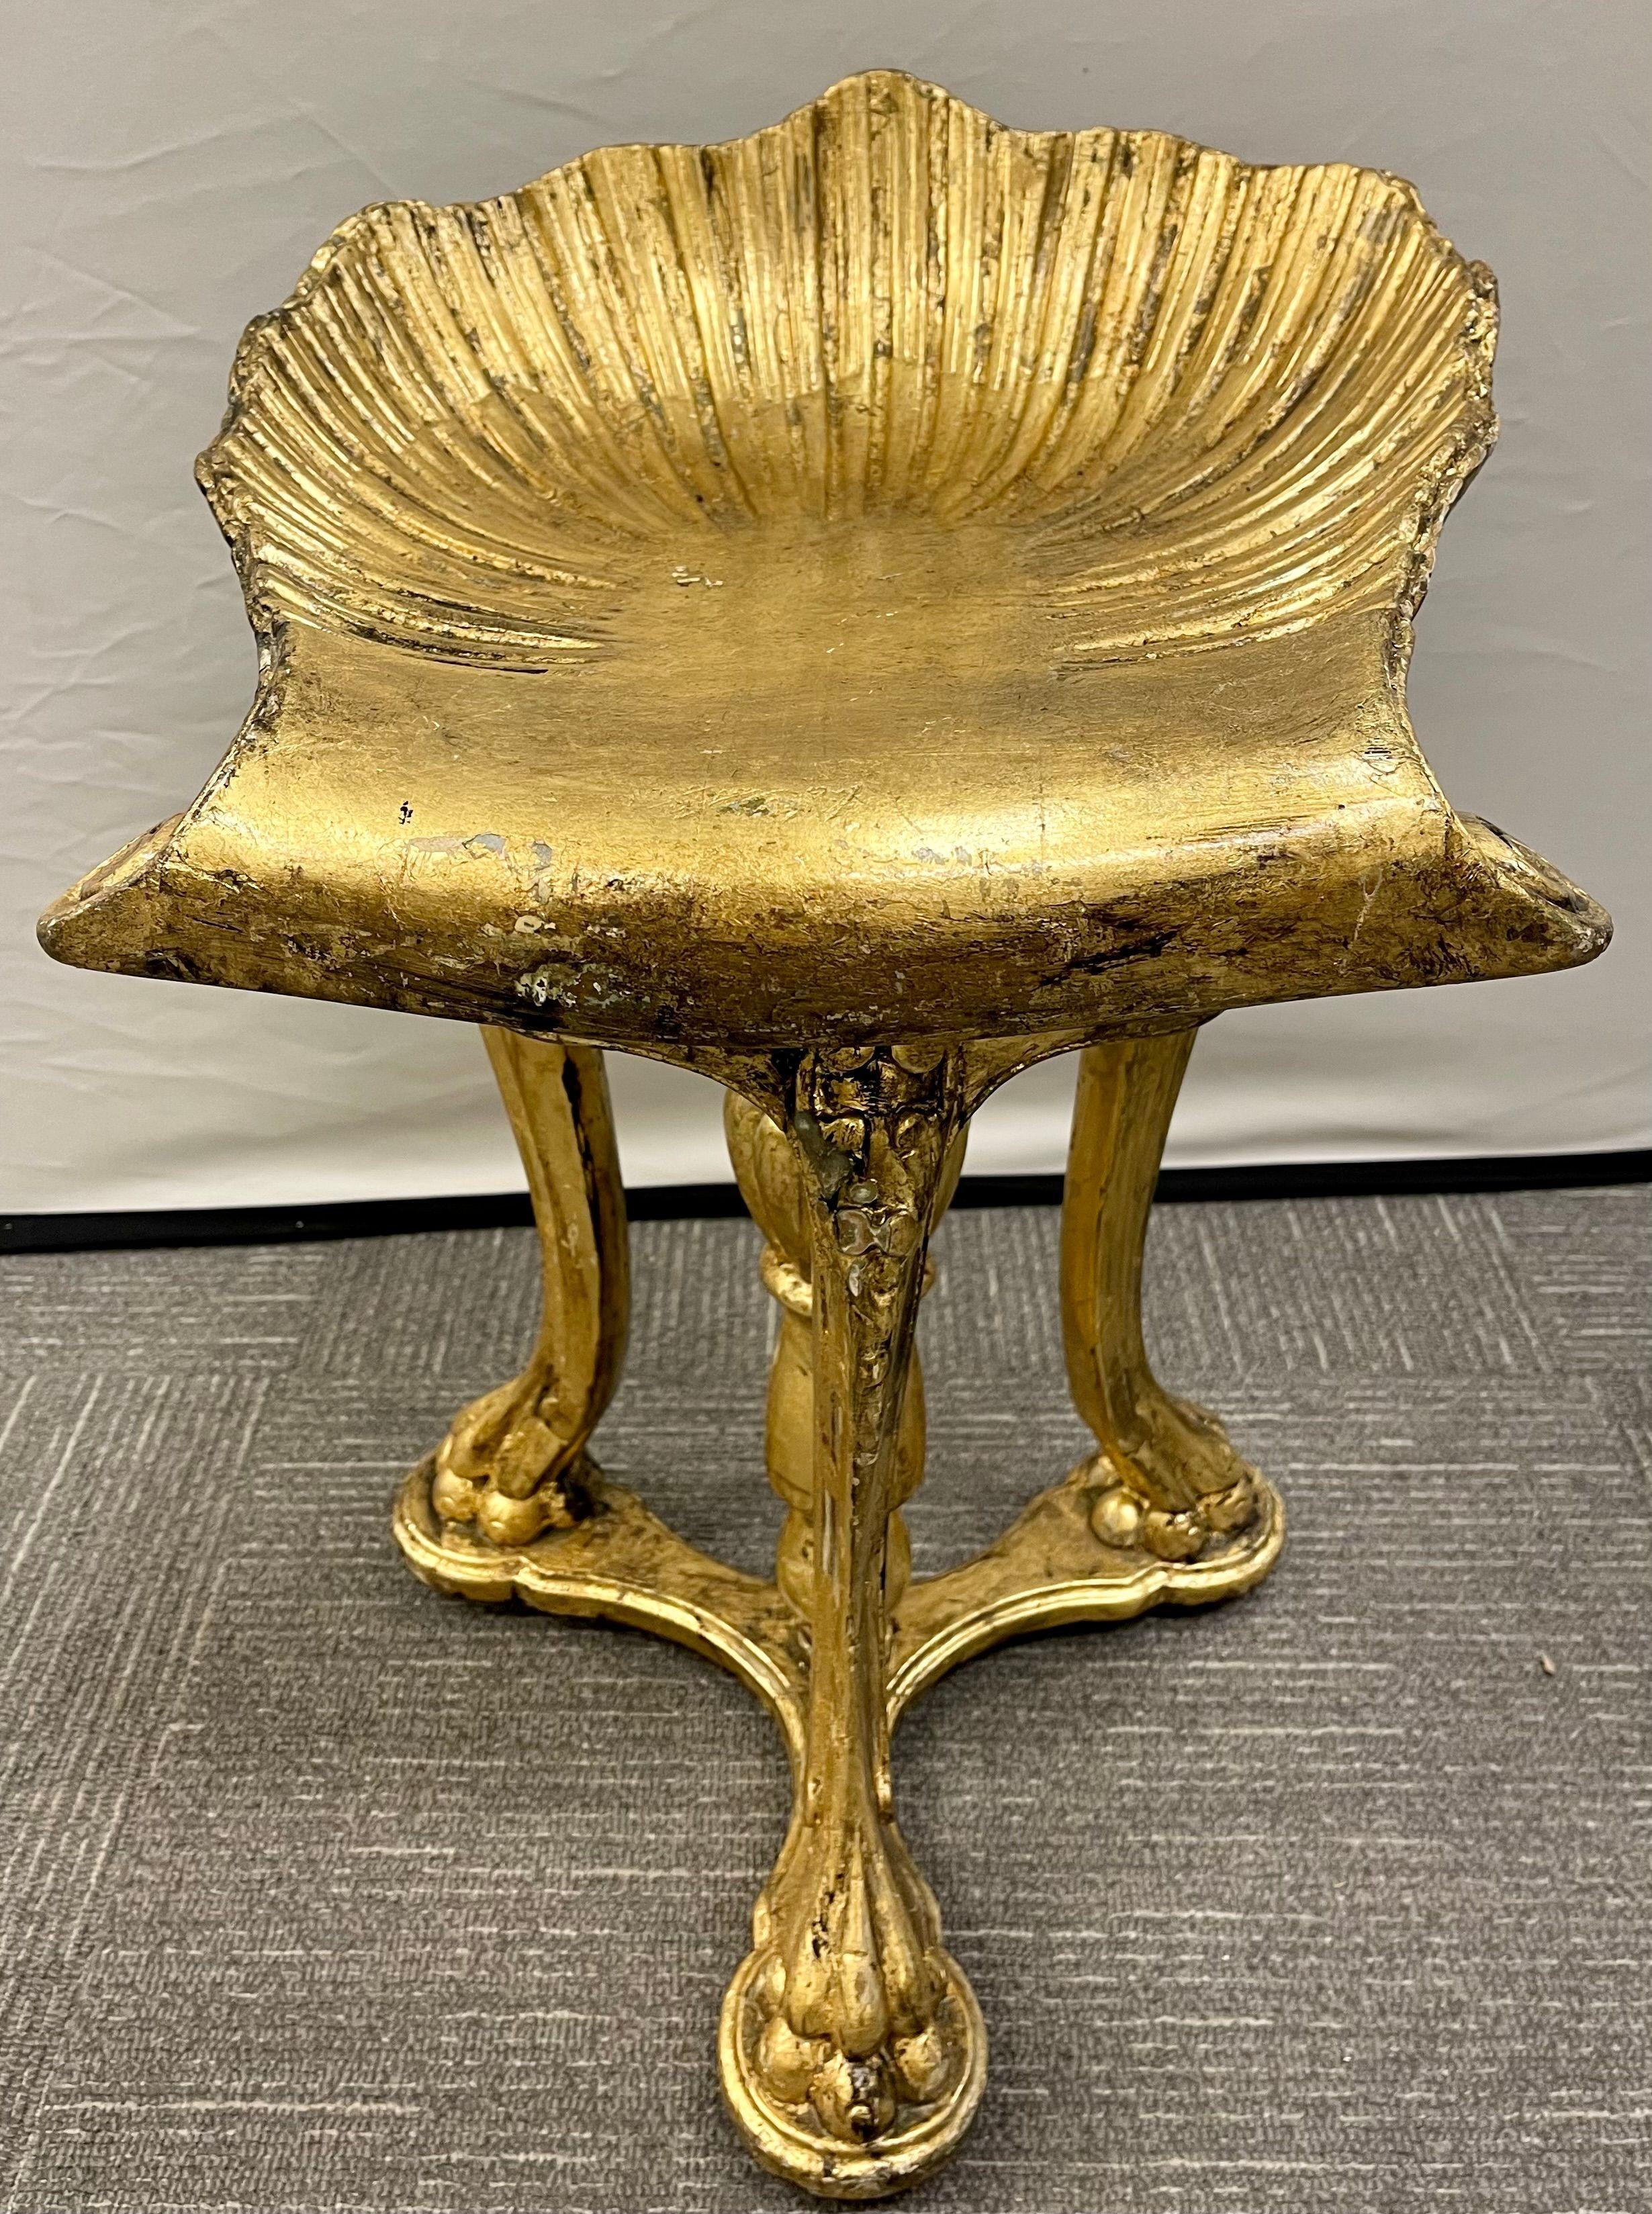 A Fine Grotto stool or Piano bench. This one of a kind bench swivels and adjust from 17.5 to 21 inches in seat height. Finely guild gold in form with wonderfully carvings in its untouched original condition. Late 19th century circa Italian Venetian